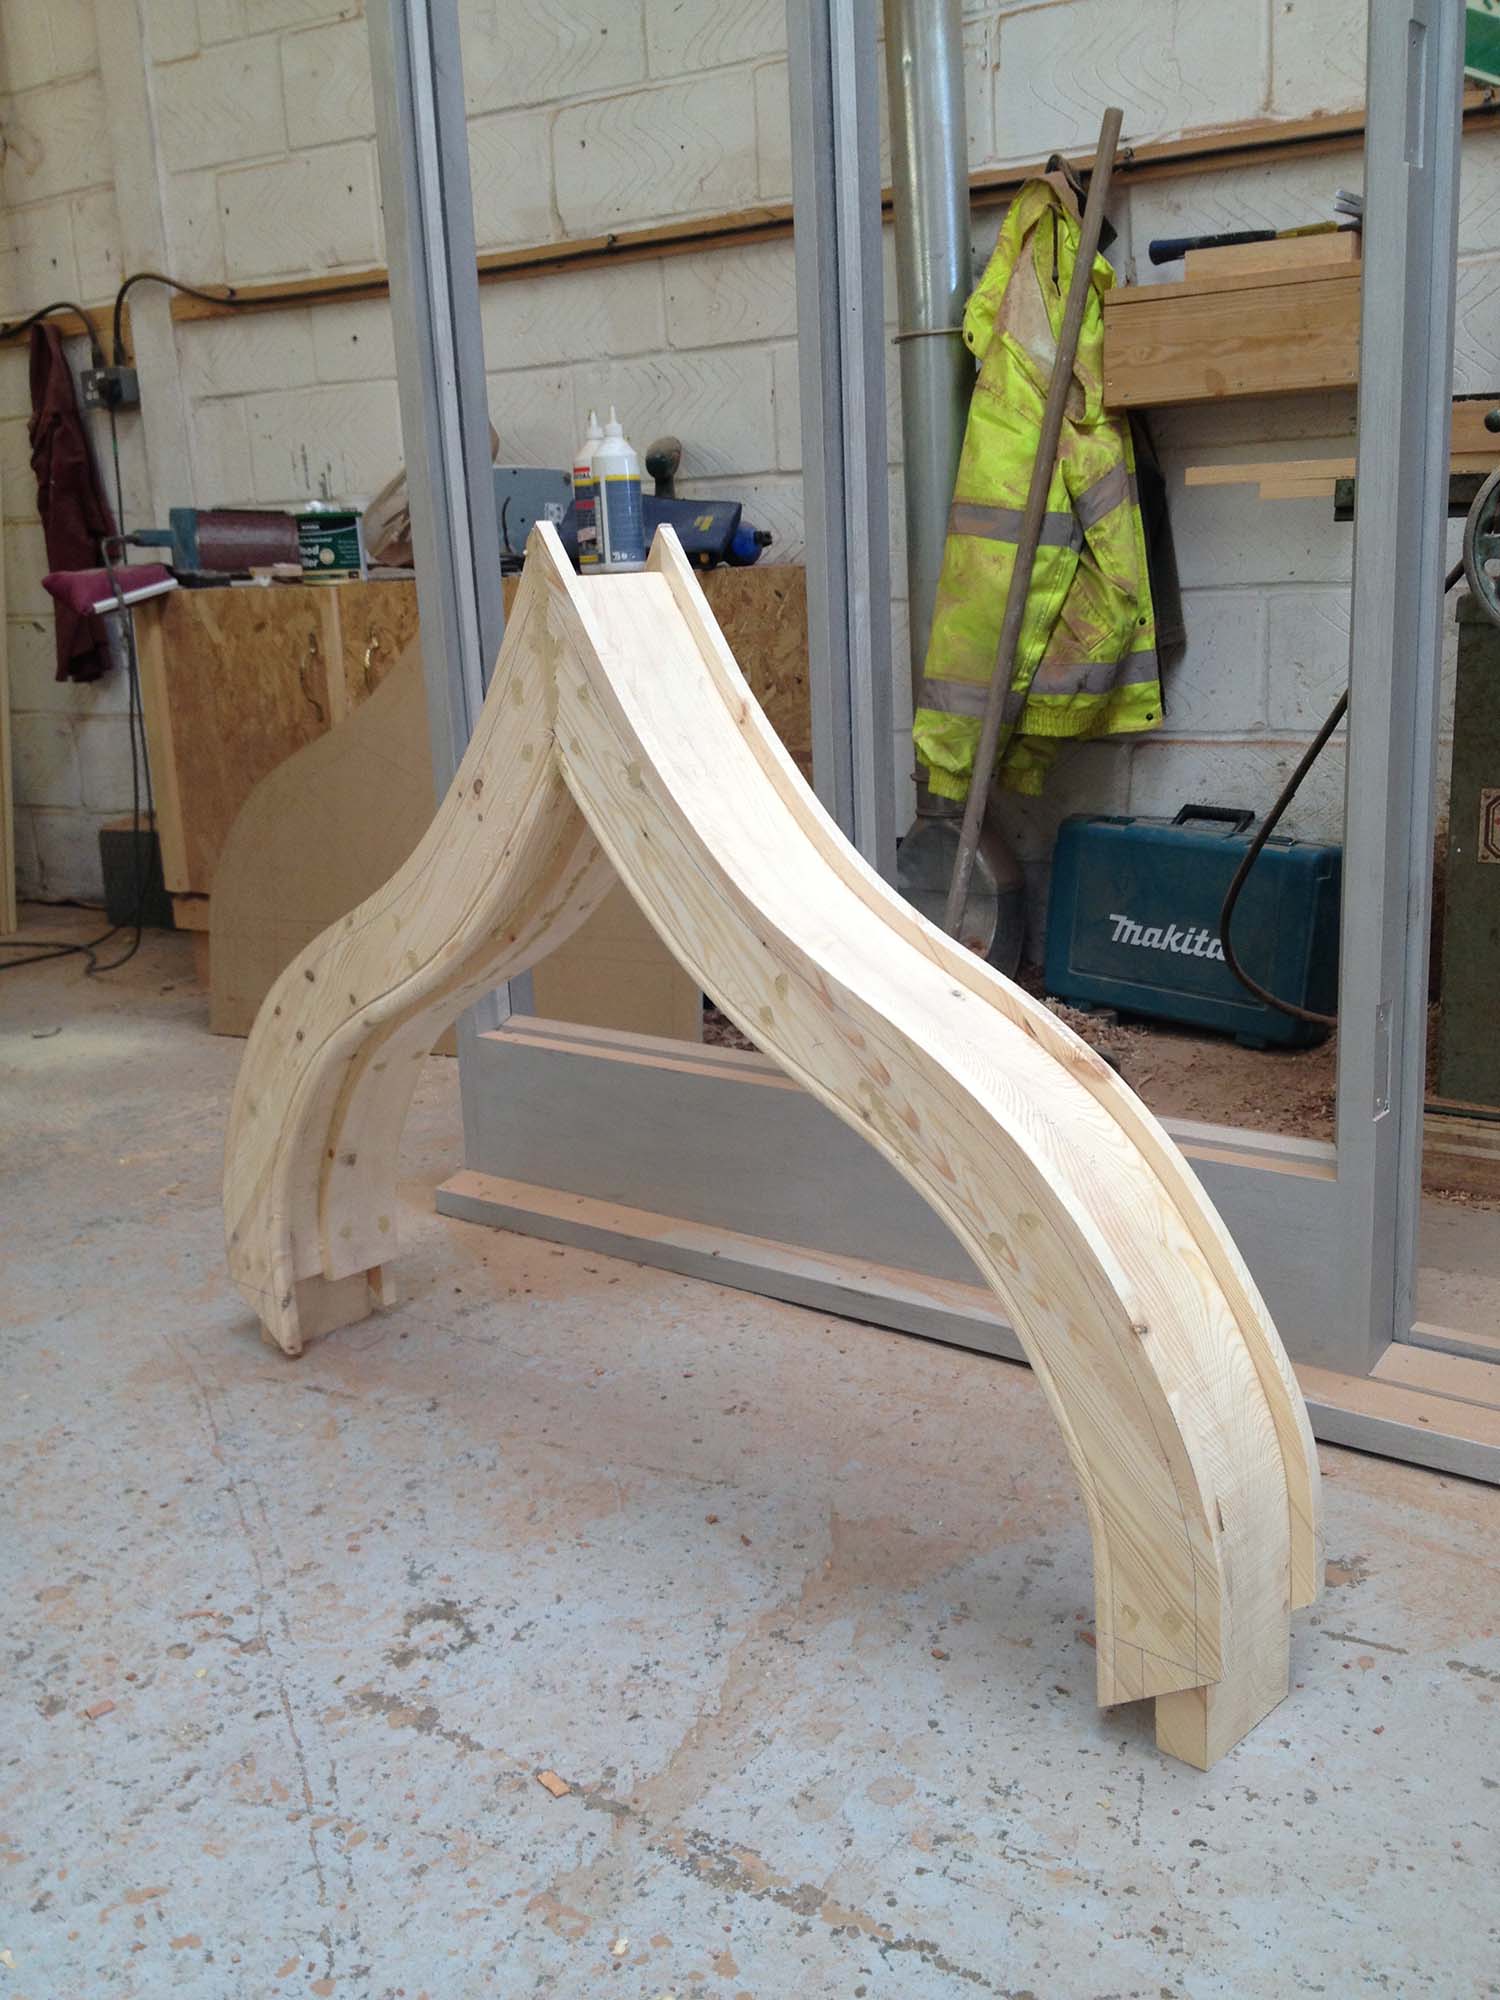 Accoya wood arch being made in a workshop